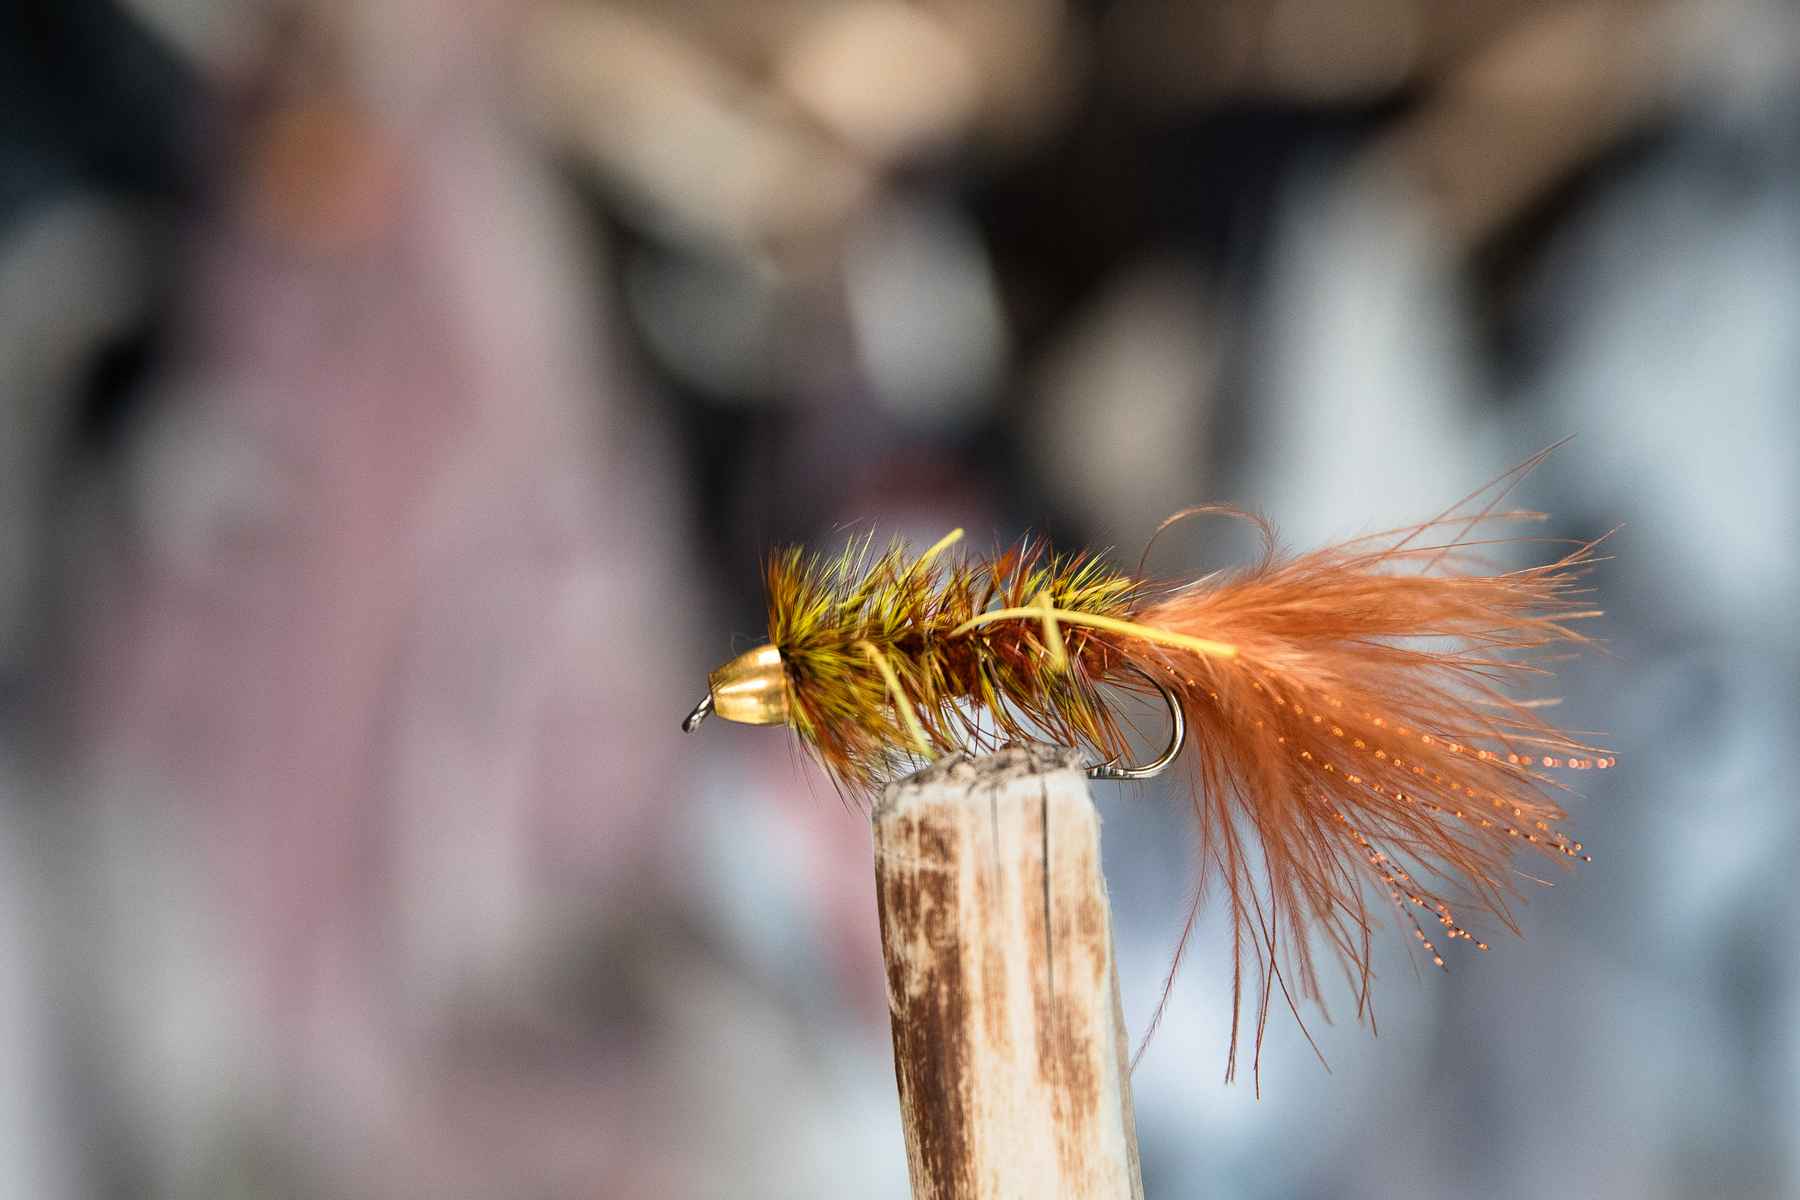 Caddis Wooly Buggers Nymphs 12 Favorite Fly Fishing Flies Assortment Trout Bass Fishing Lure Wet Dry Streamers 